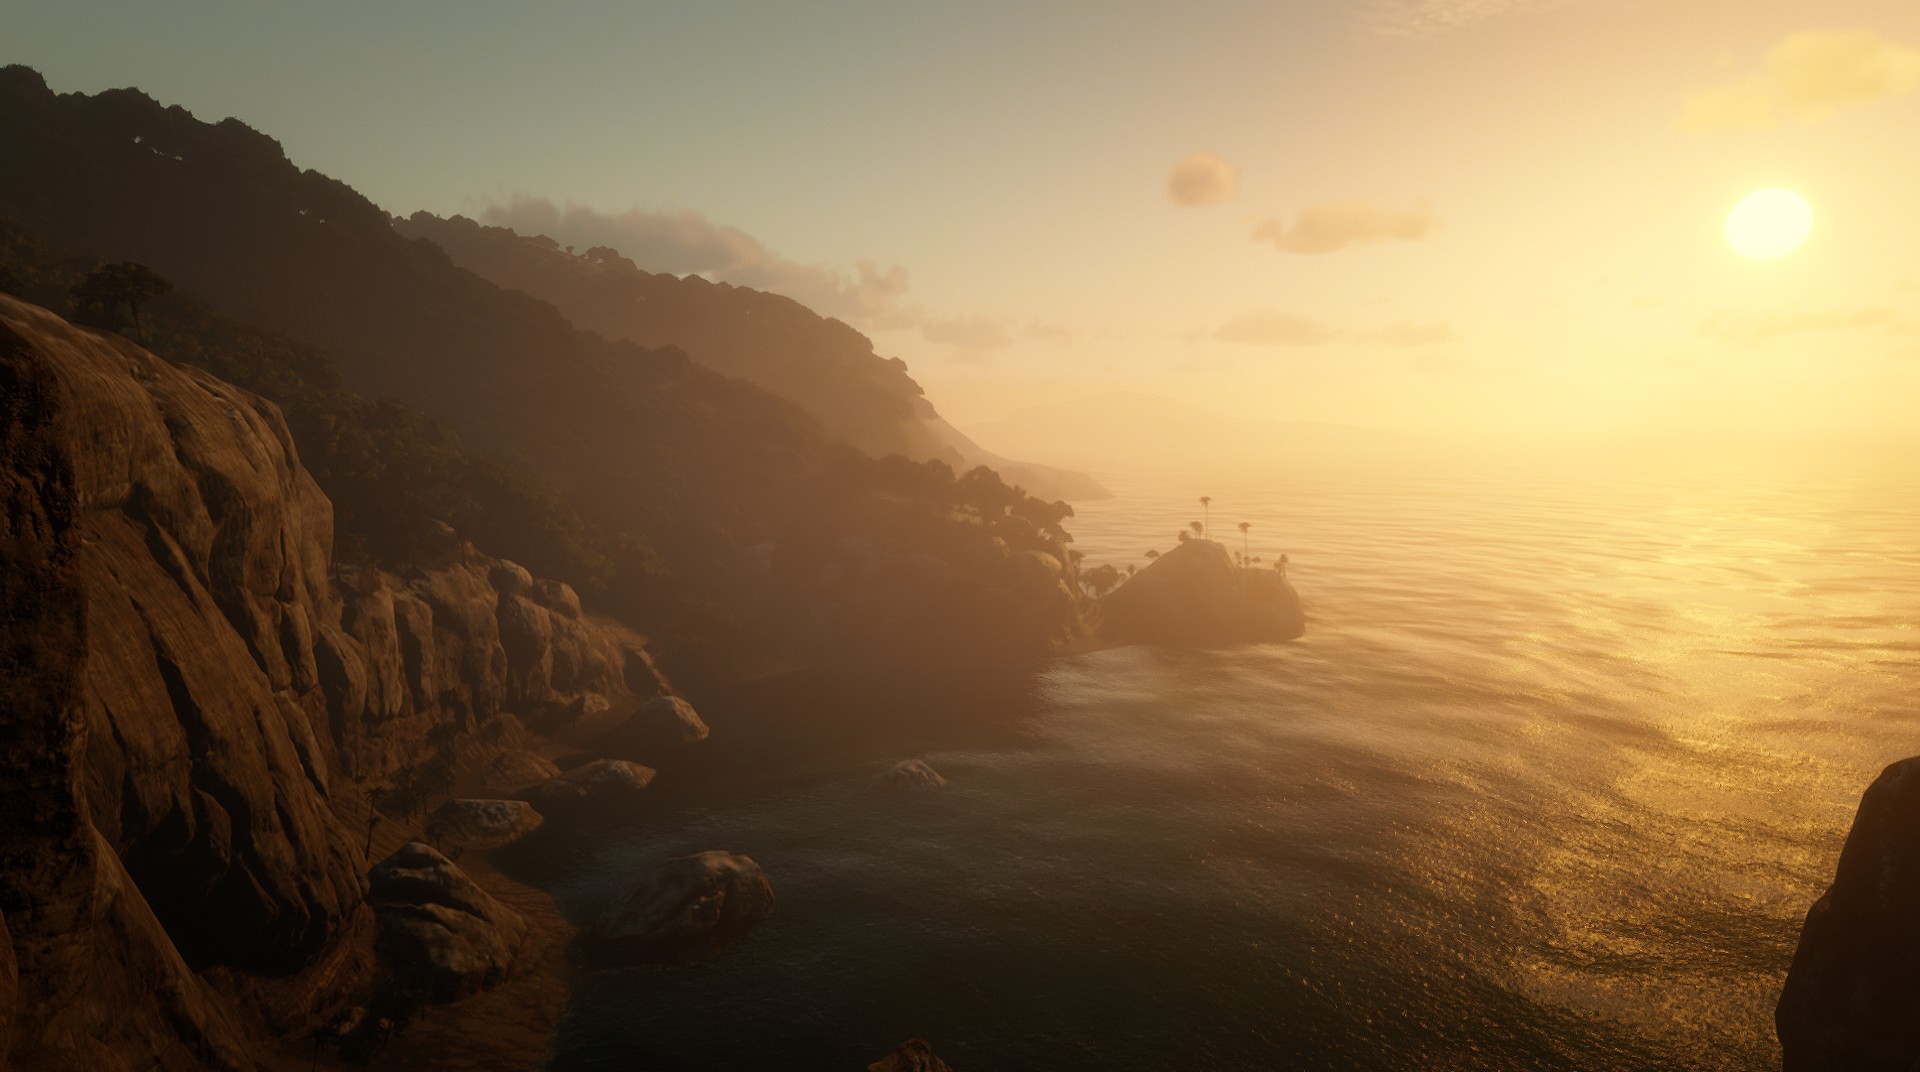 island in red dead redemption 2